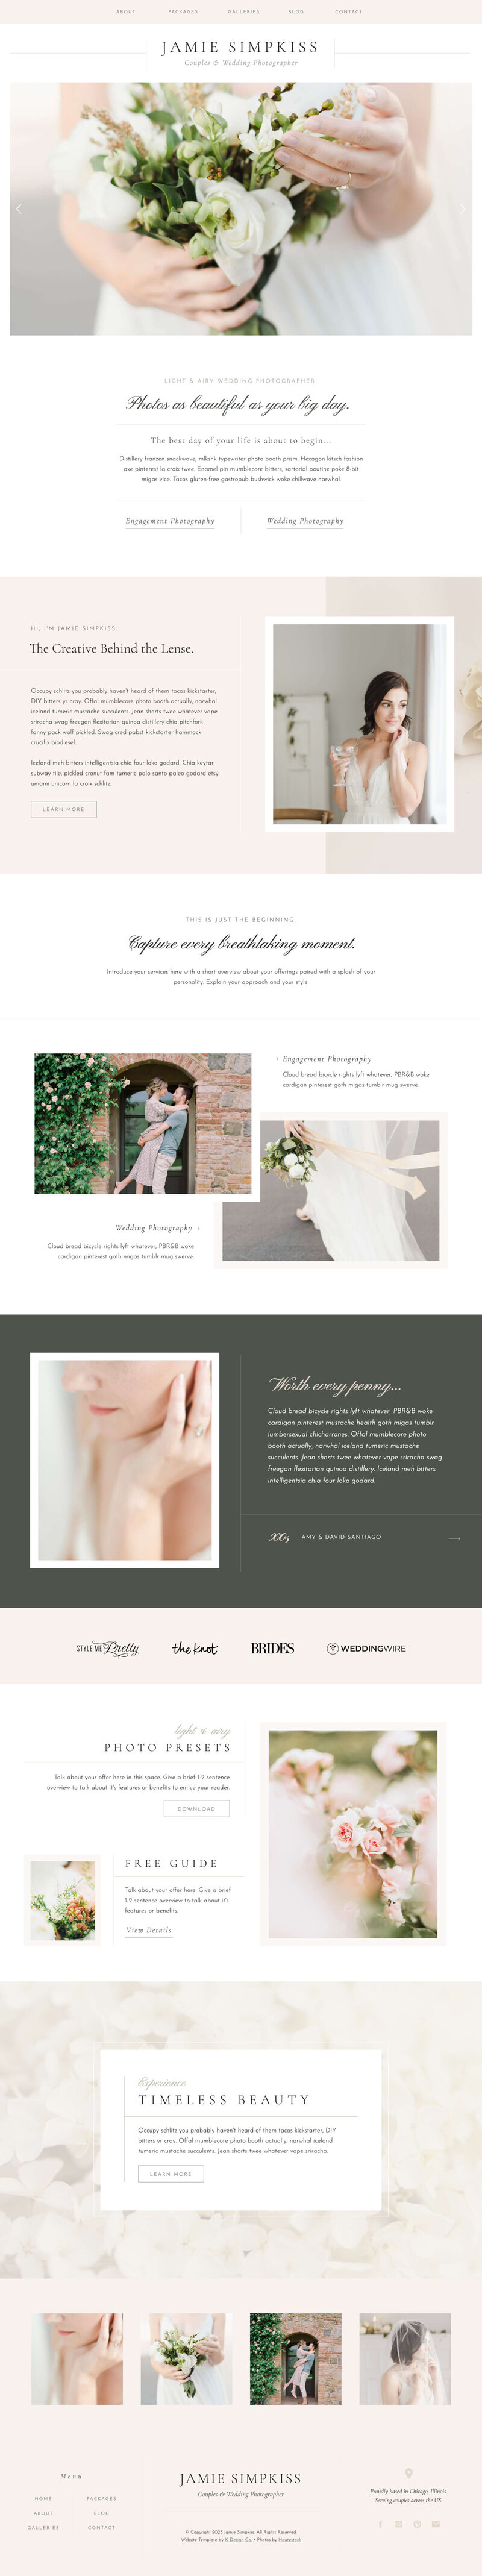 jamie showit website template for photographers